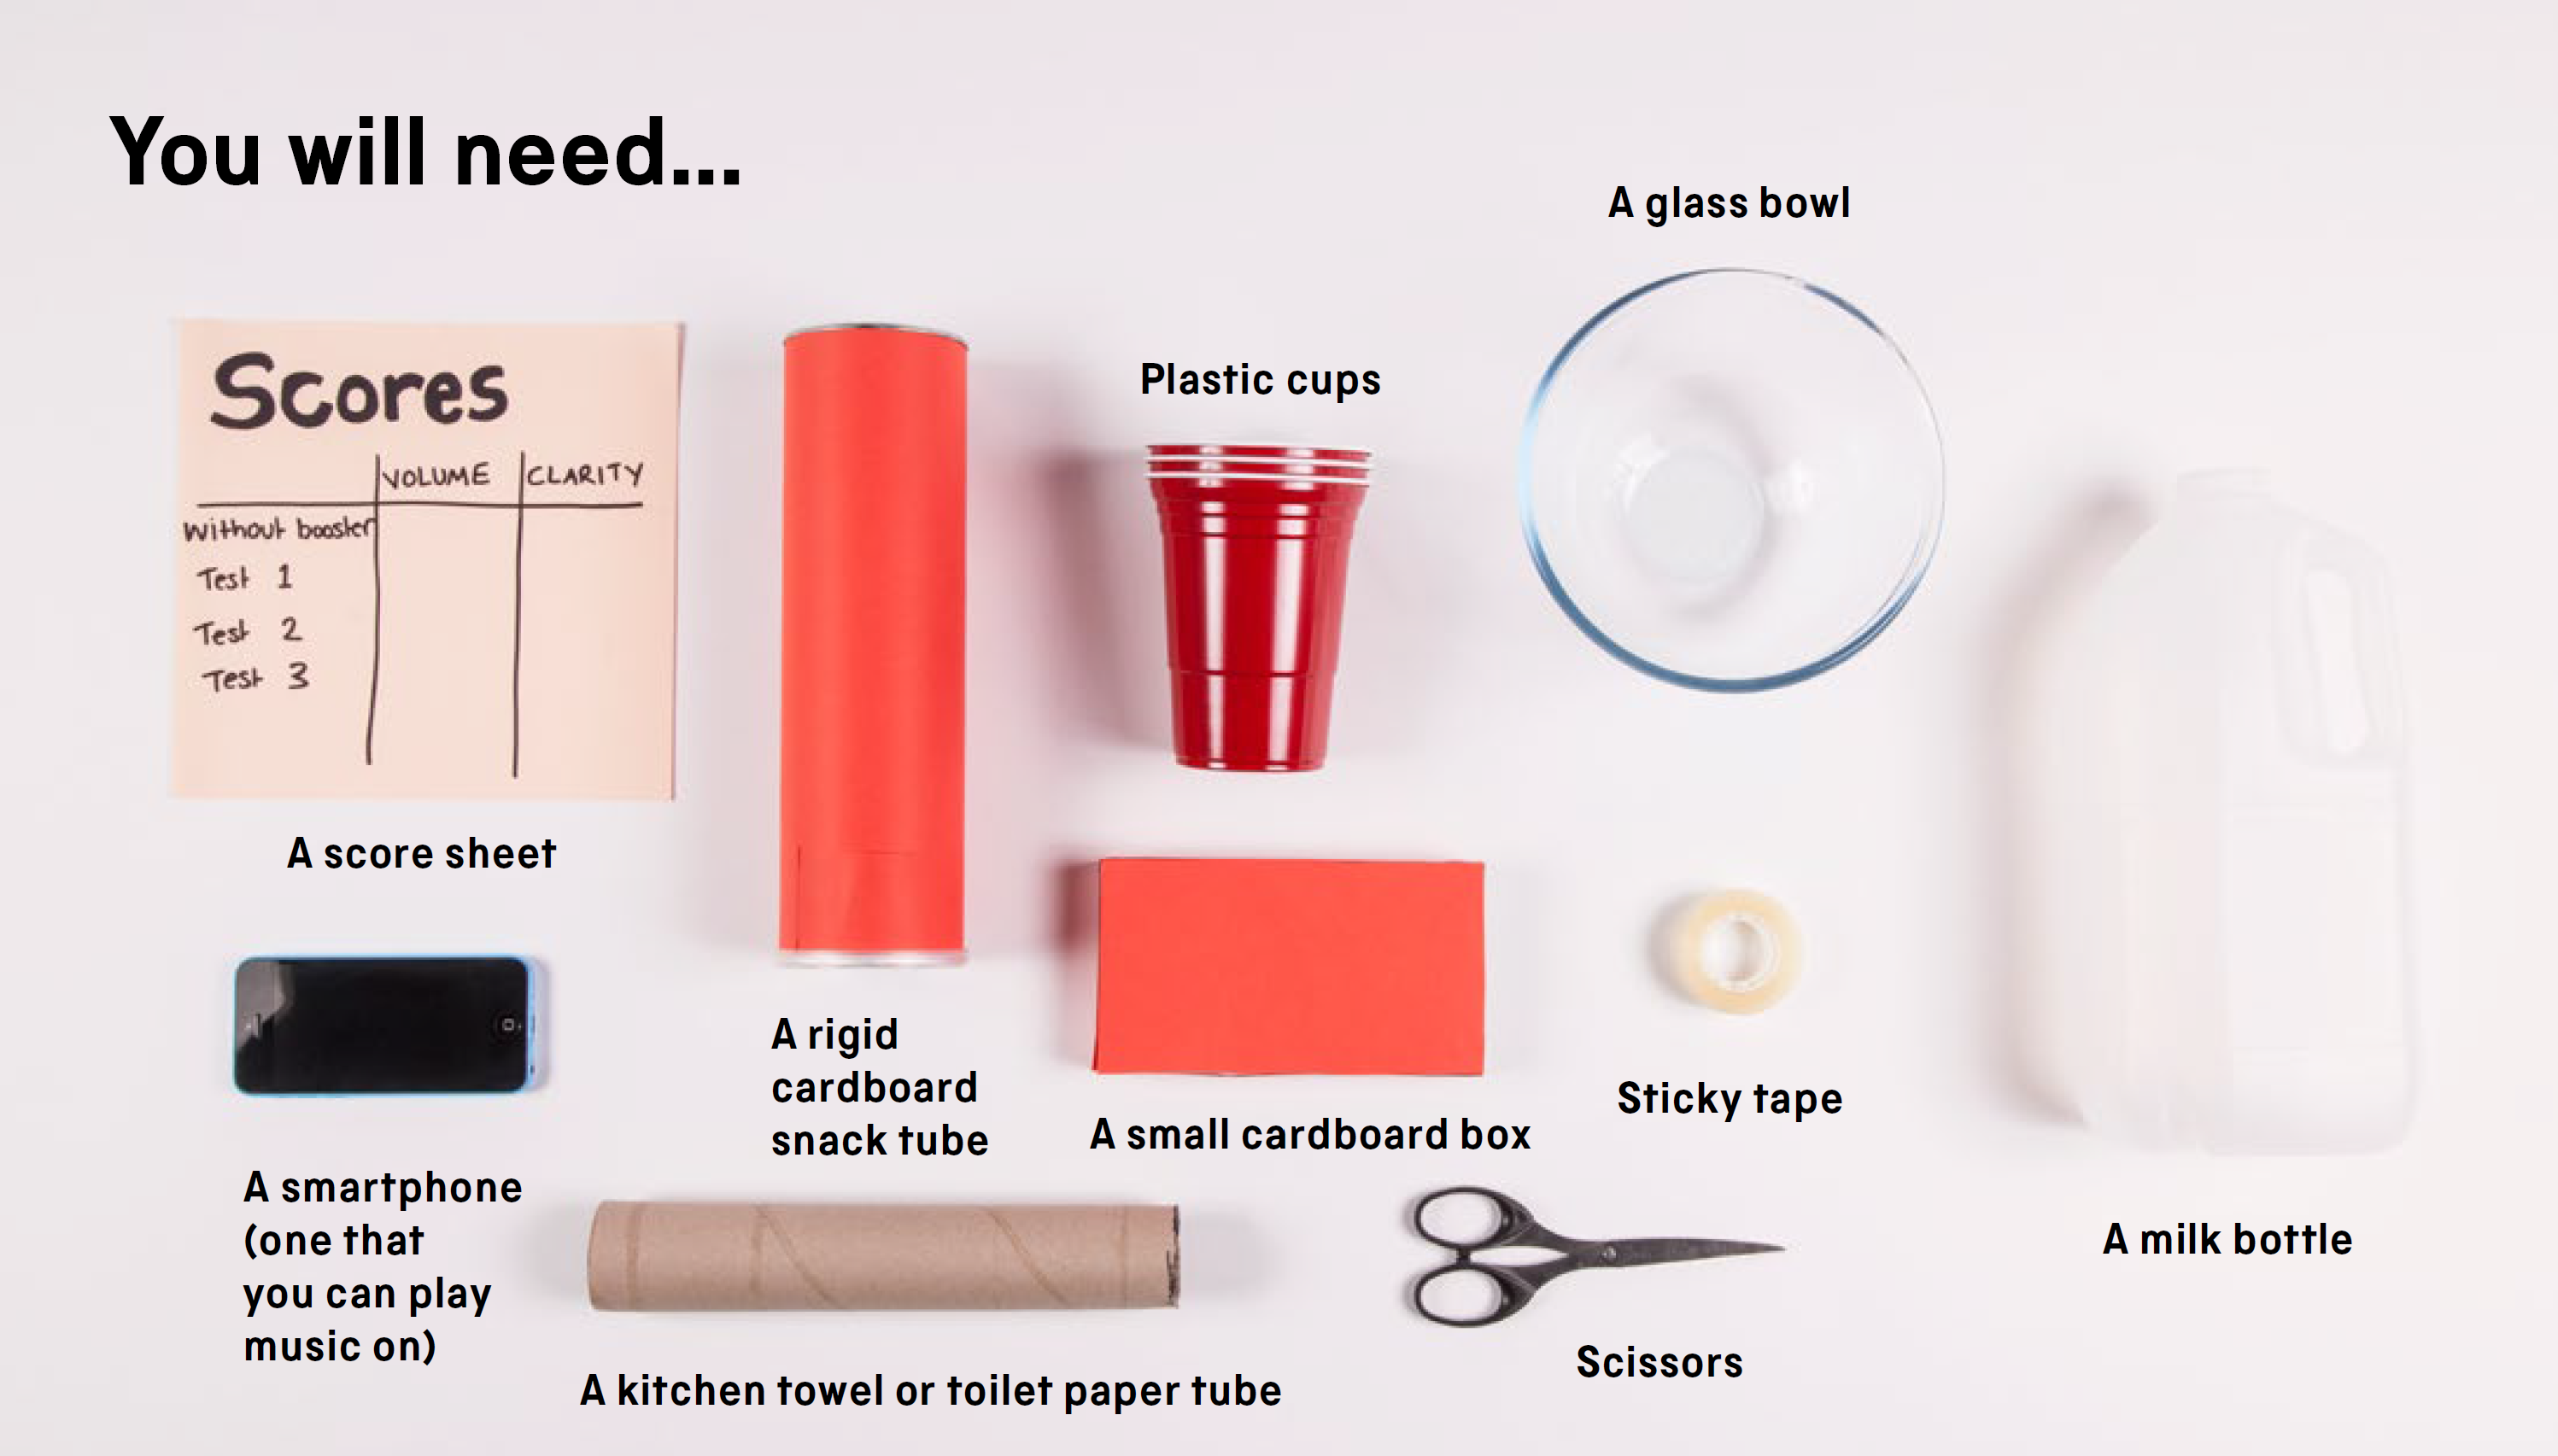 You will need: a score sheet, a smartphone (one that you can play music on), a small cardboard box, a rigid cardboard snack tube, a kitchen towel or toilet paper tube, reusable plastic cups, a glass bowl, an empty milk bottle, sticky tape and scissors